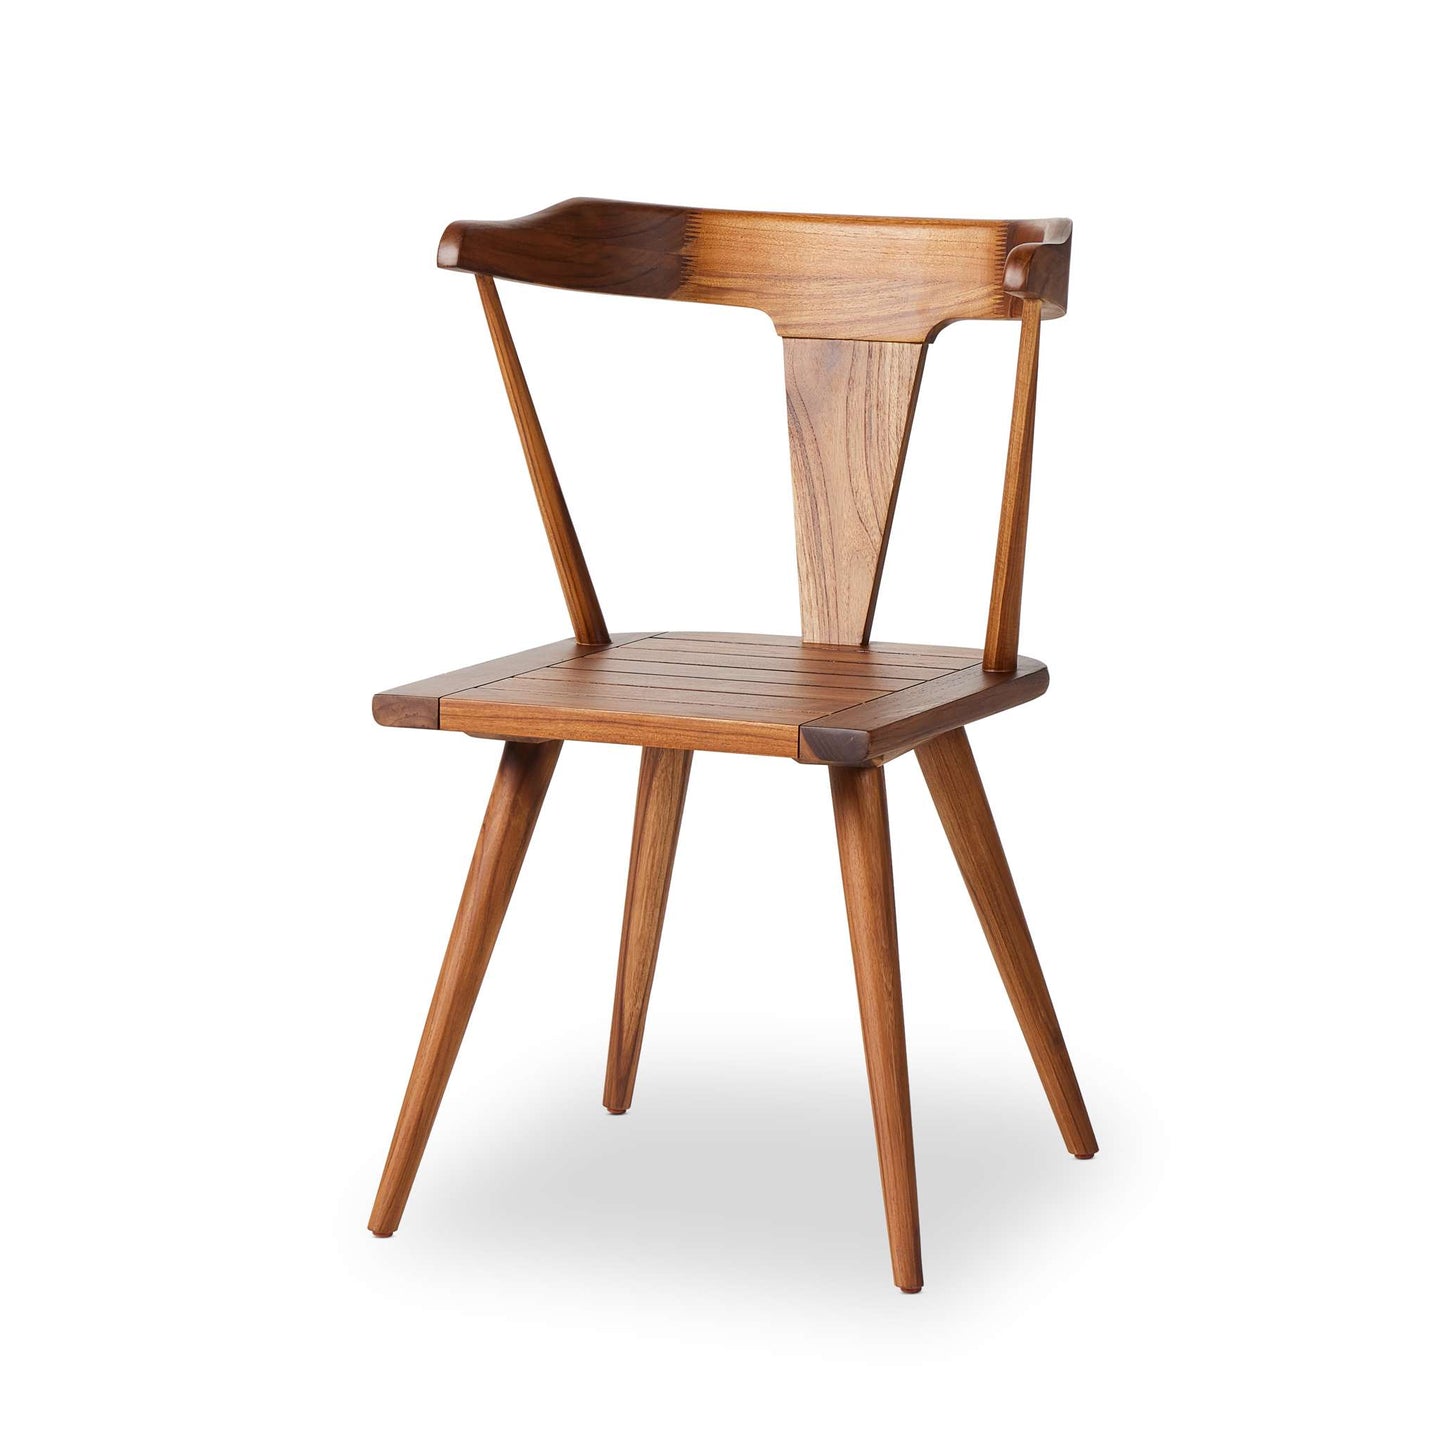 Coleson Outdr Dining Chair